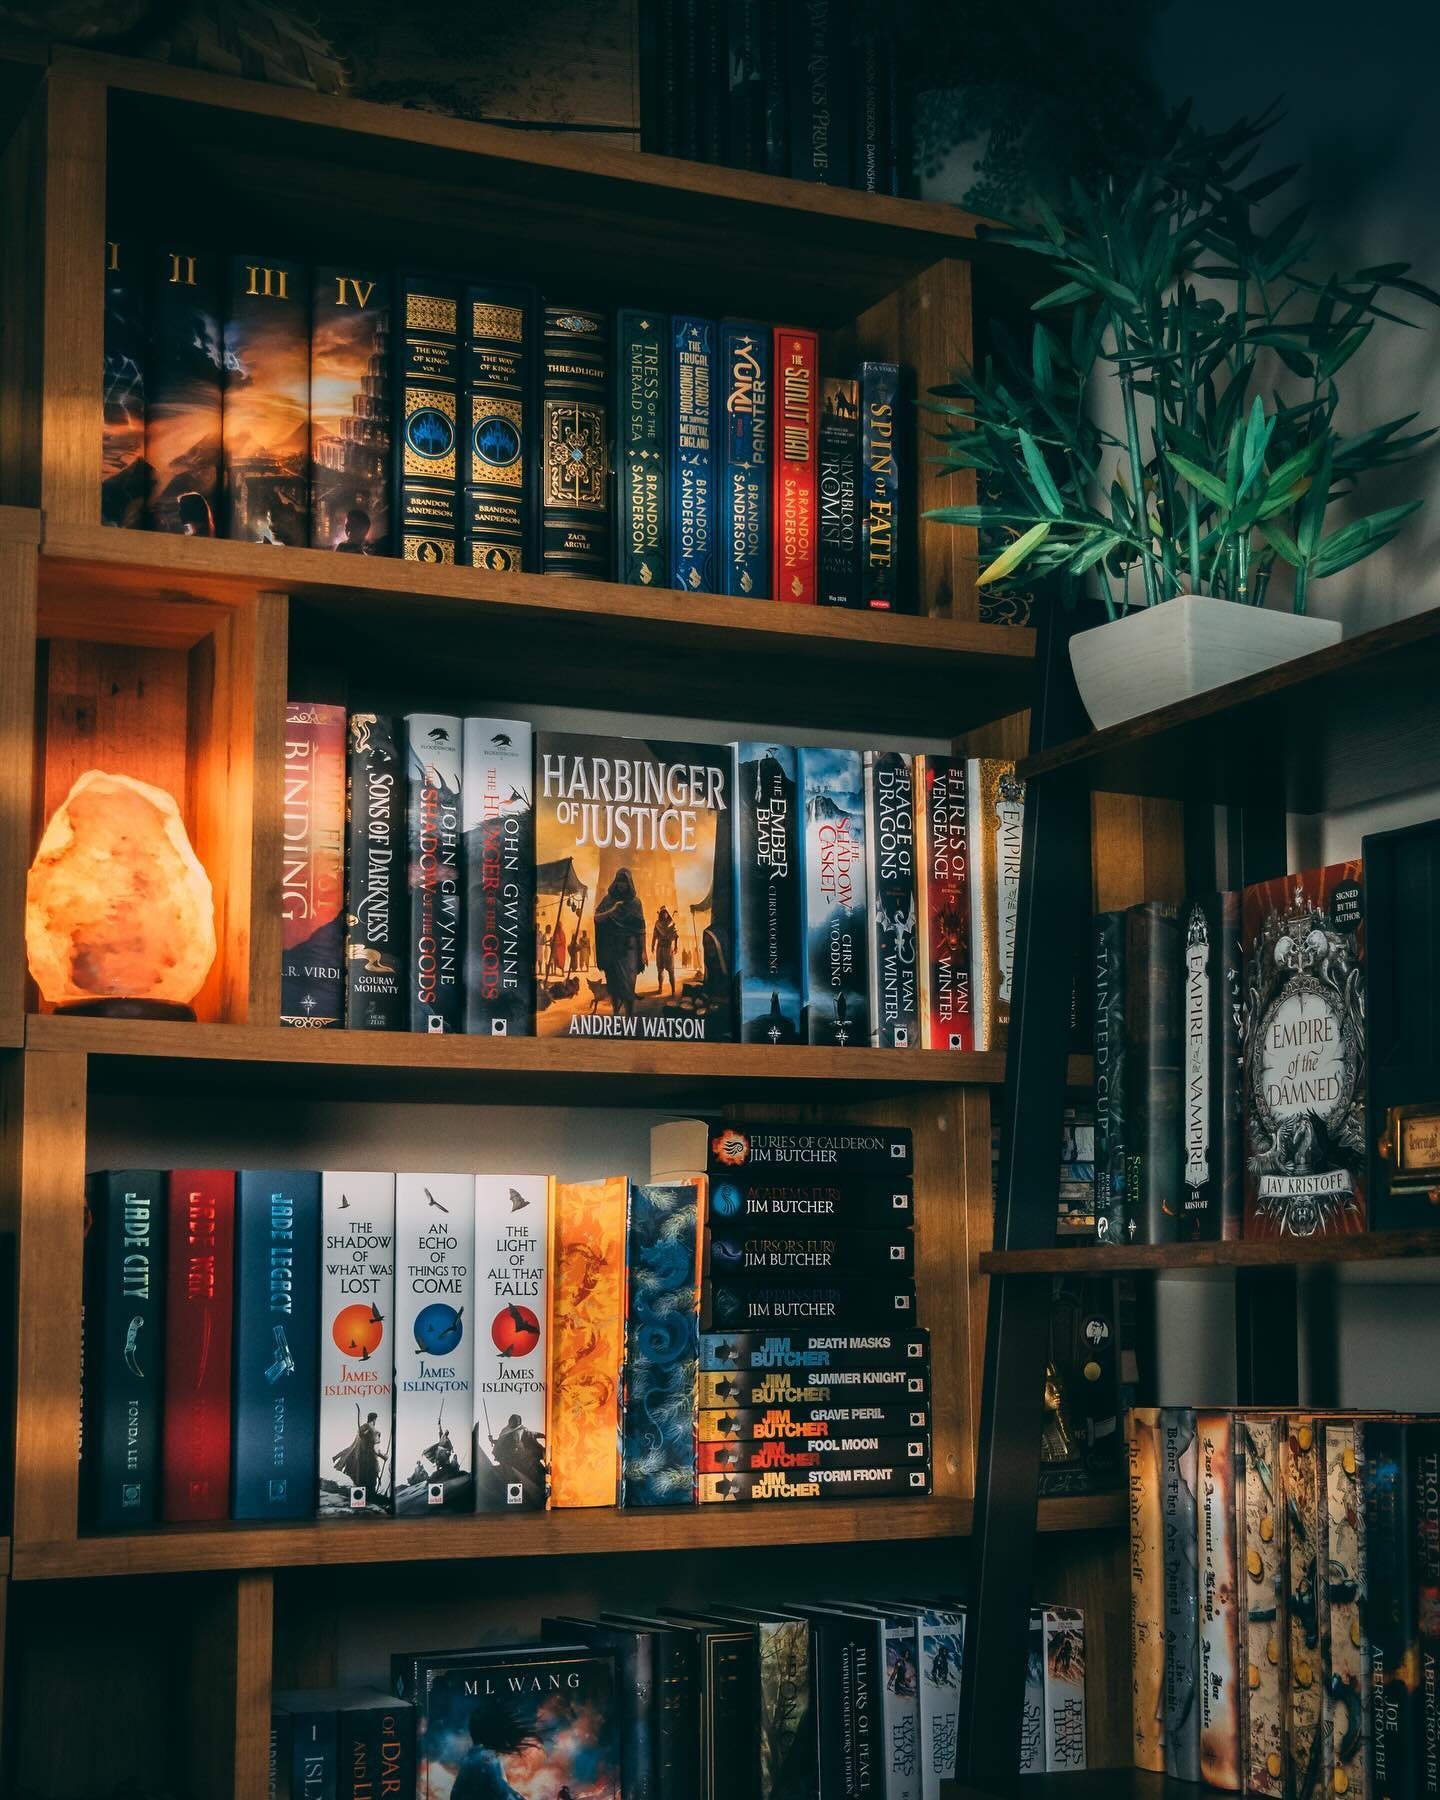 Fantasy book shelf super sunlight Saturday shot 🤌

📚 What are you reading currently?

Extra alliteration today after @thefantasynovice and @veldonreads made horrific posts 😤

I&rsquo;ve got a couple books on the go. Spin of Fate, Kraken Rider Z, a